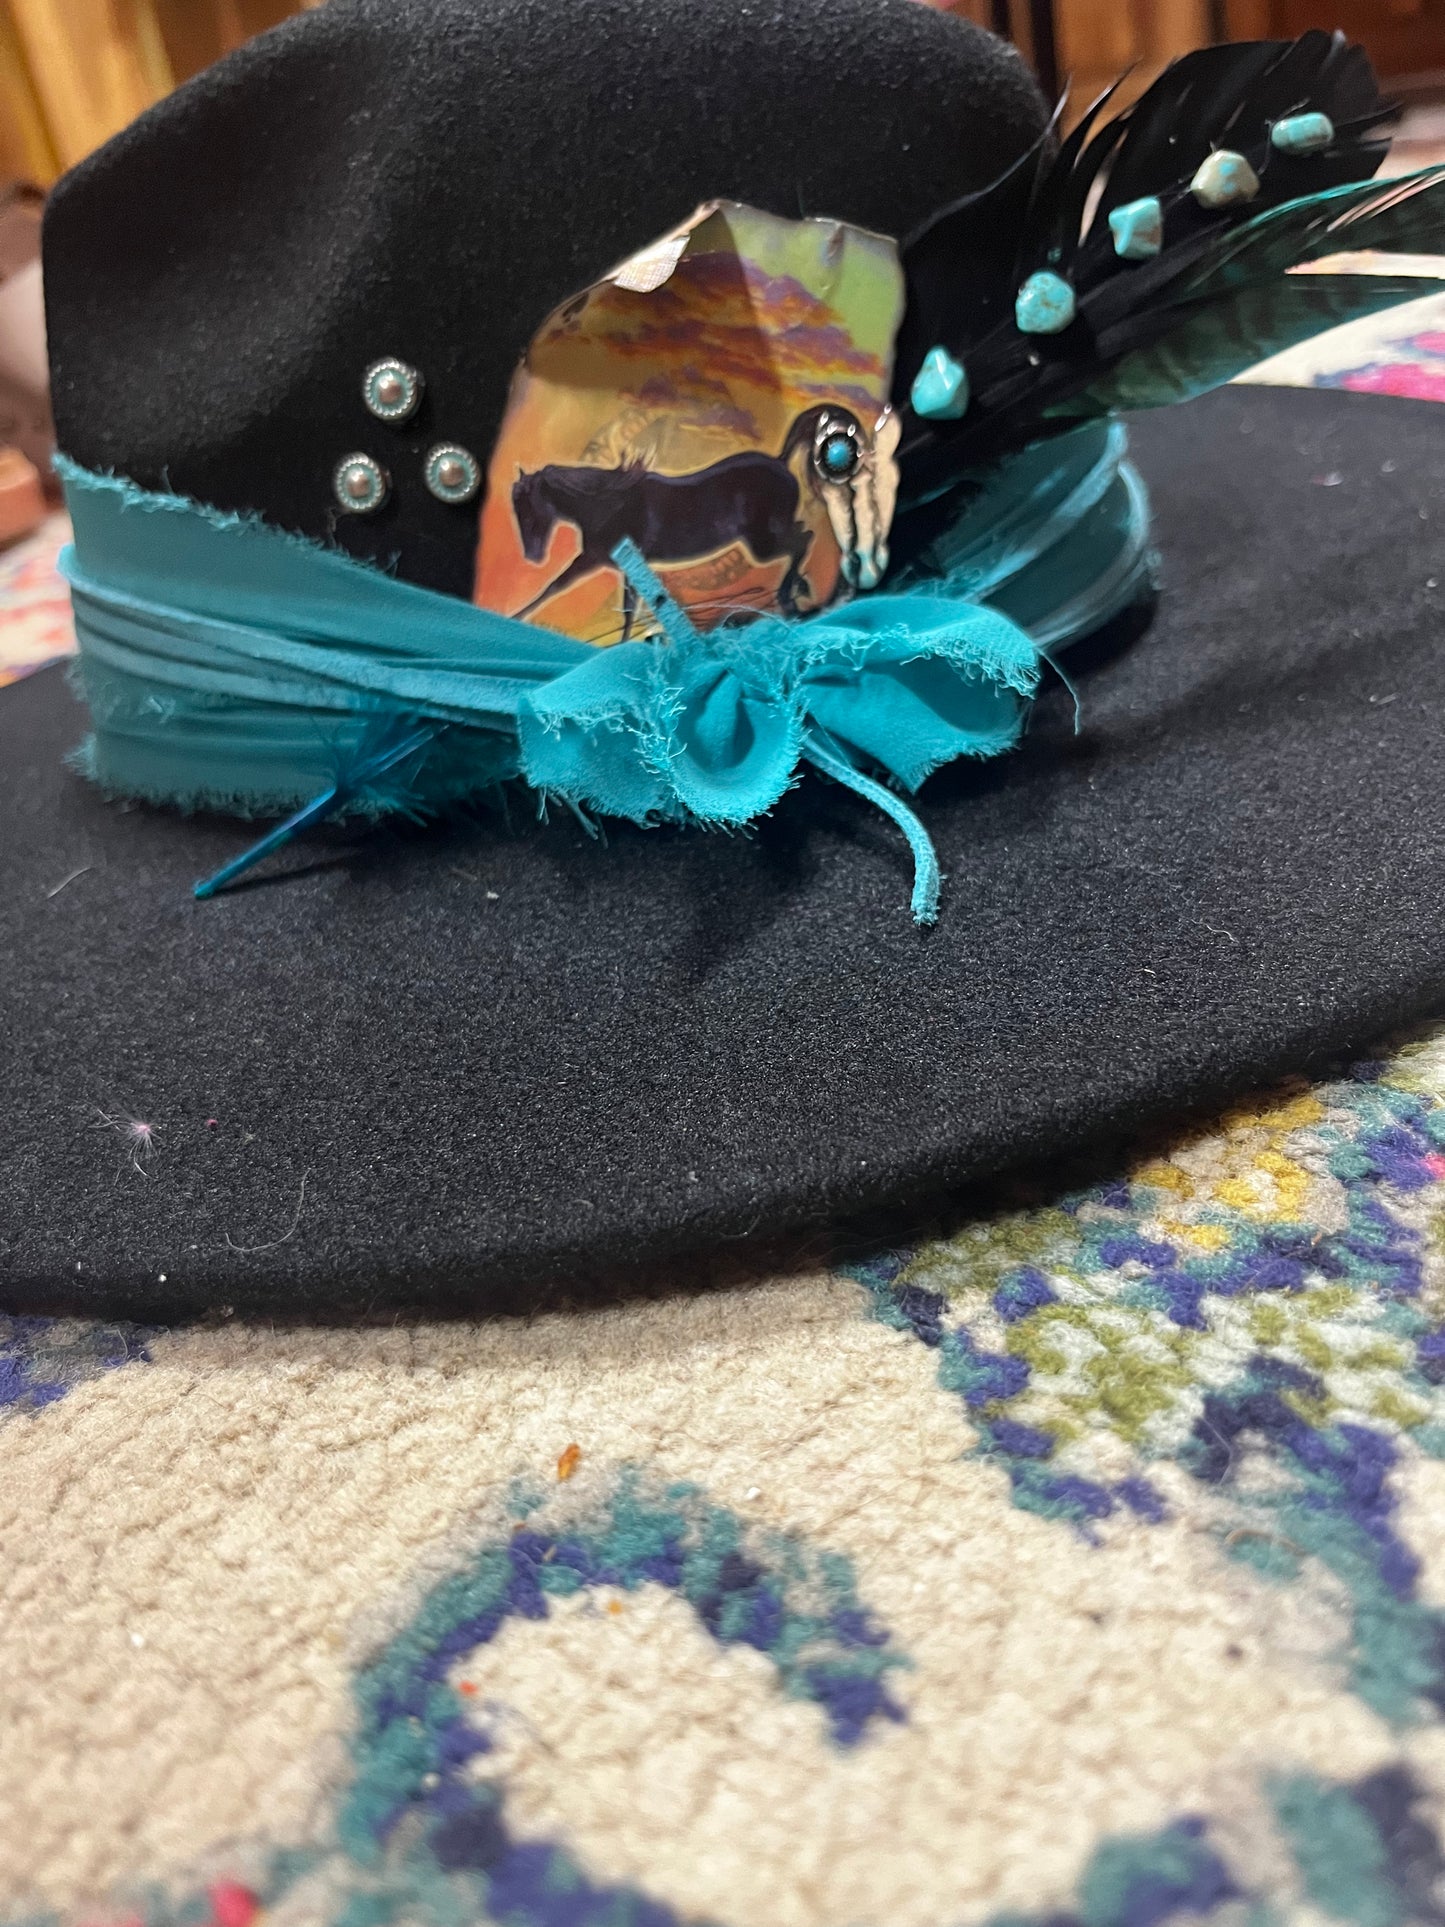 Black with teal horse handmade hat